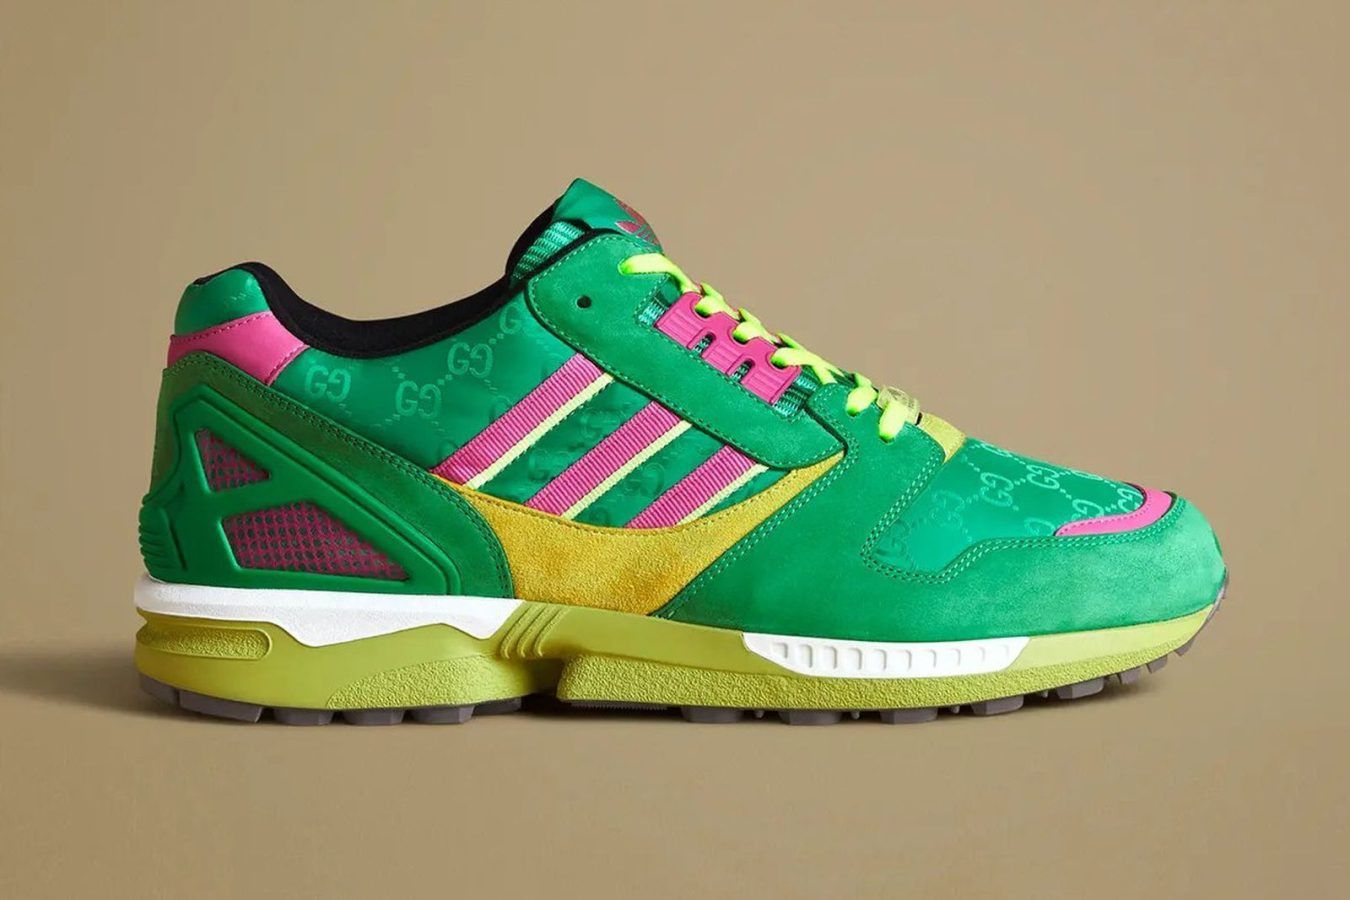 Adidas x Gucci drops sneakers for Spring/Summer